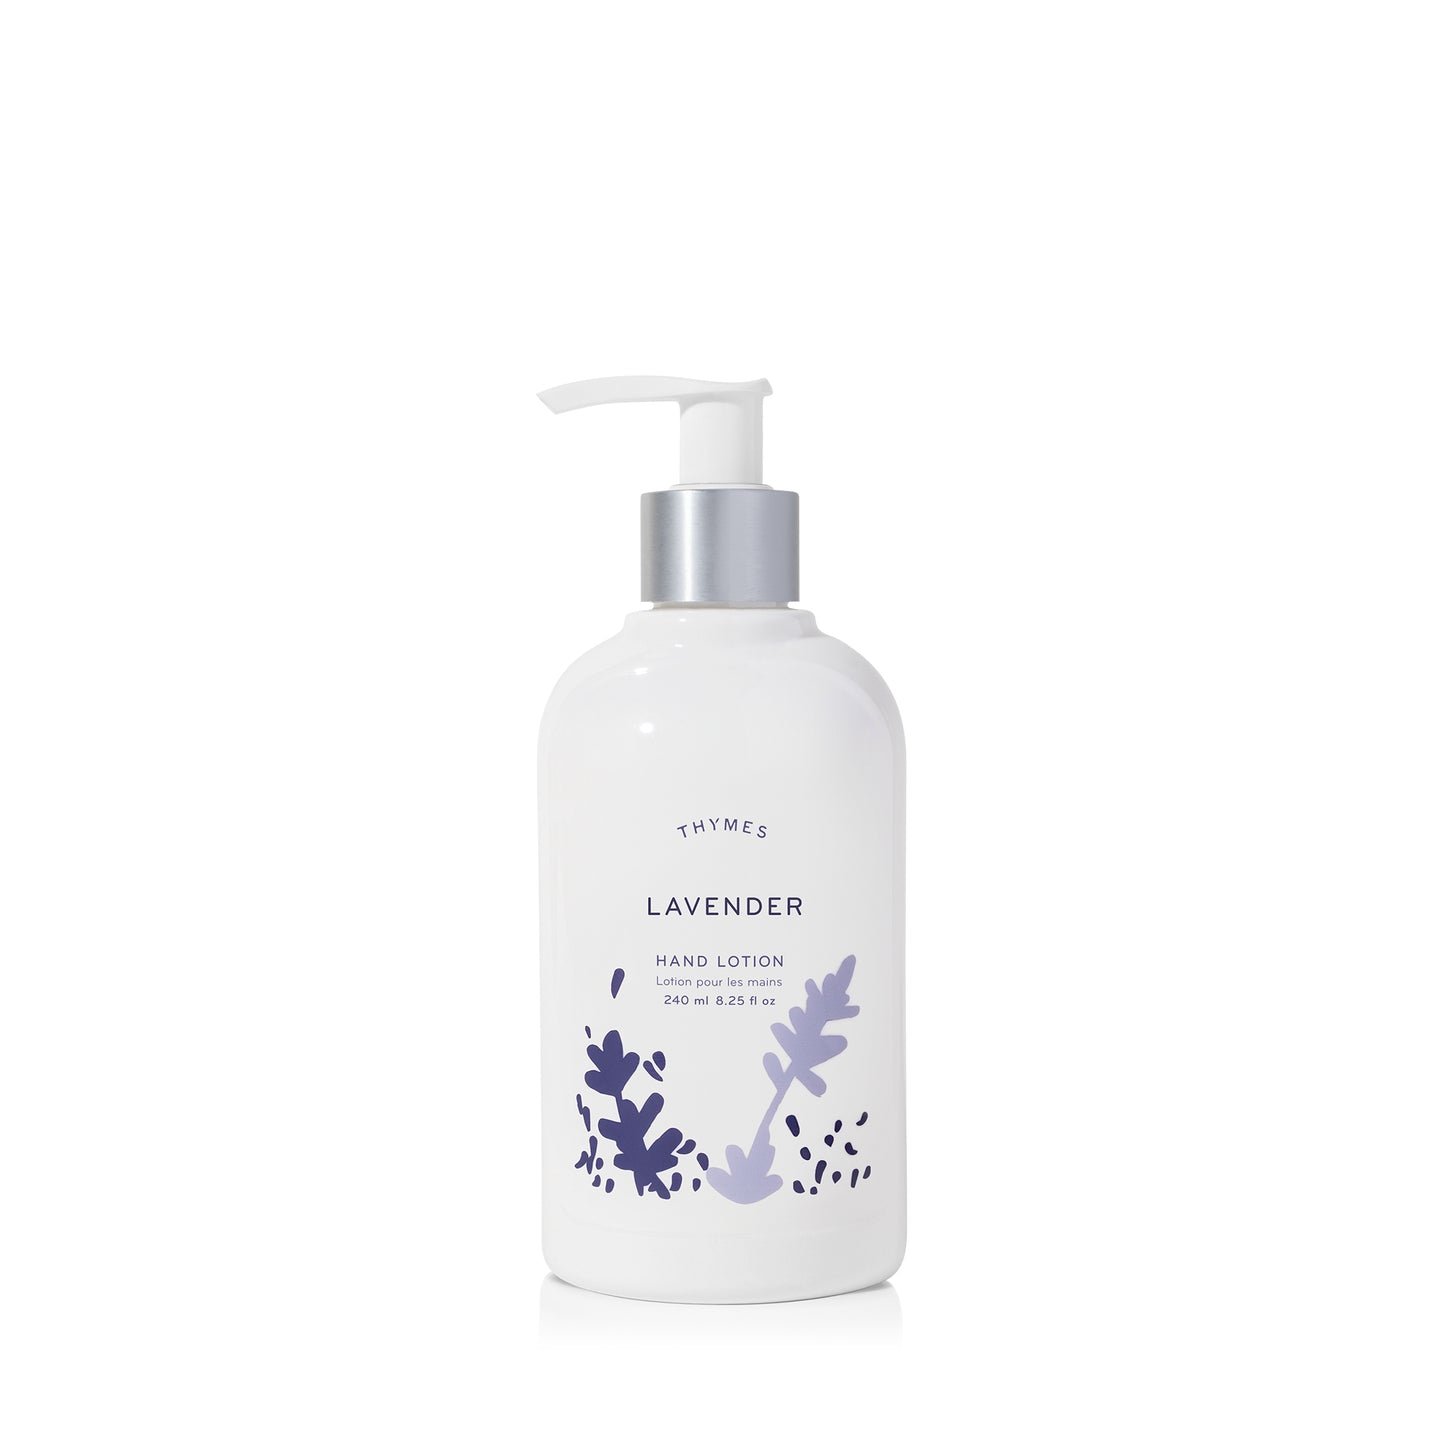 Thymes Hand Lotion 8.25 oz | Lavender